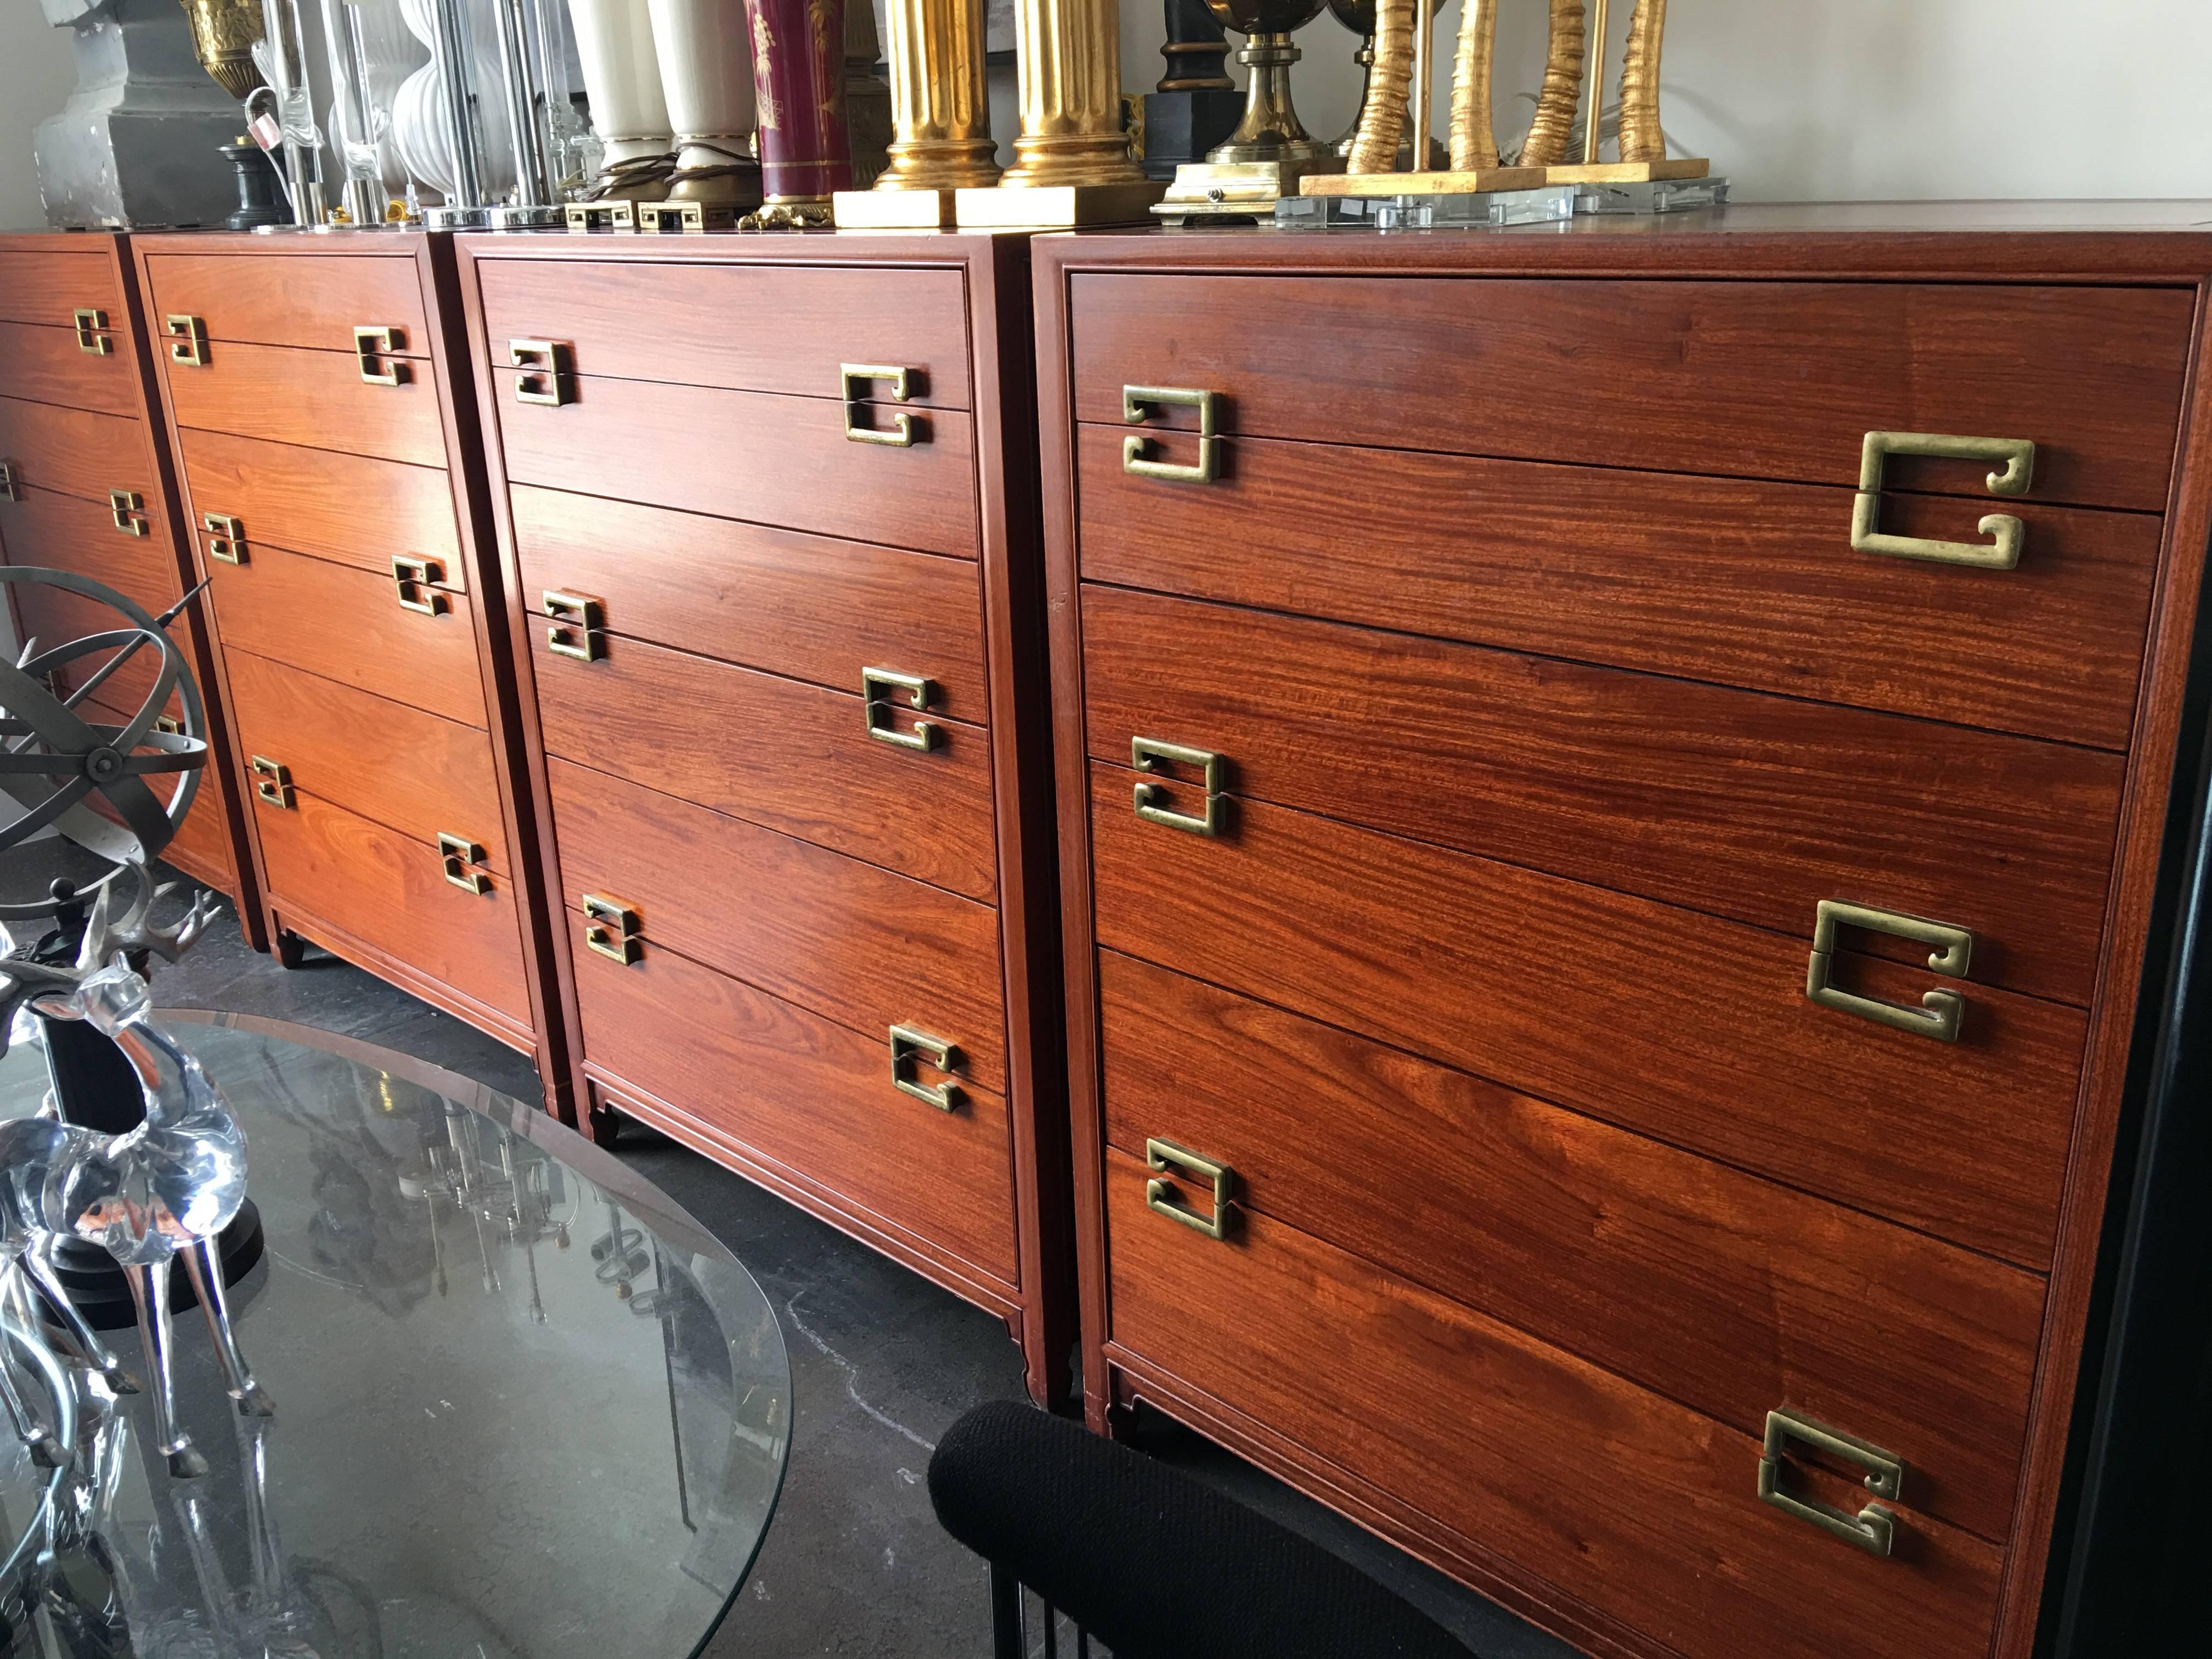 A fine 1940s Paul Frankl style Asian Inspired rosewood six-drawer tall dressers with solid brass hardware providing great storage. Artfully manufactured.